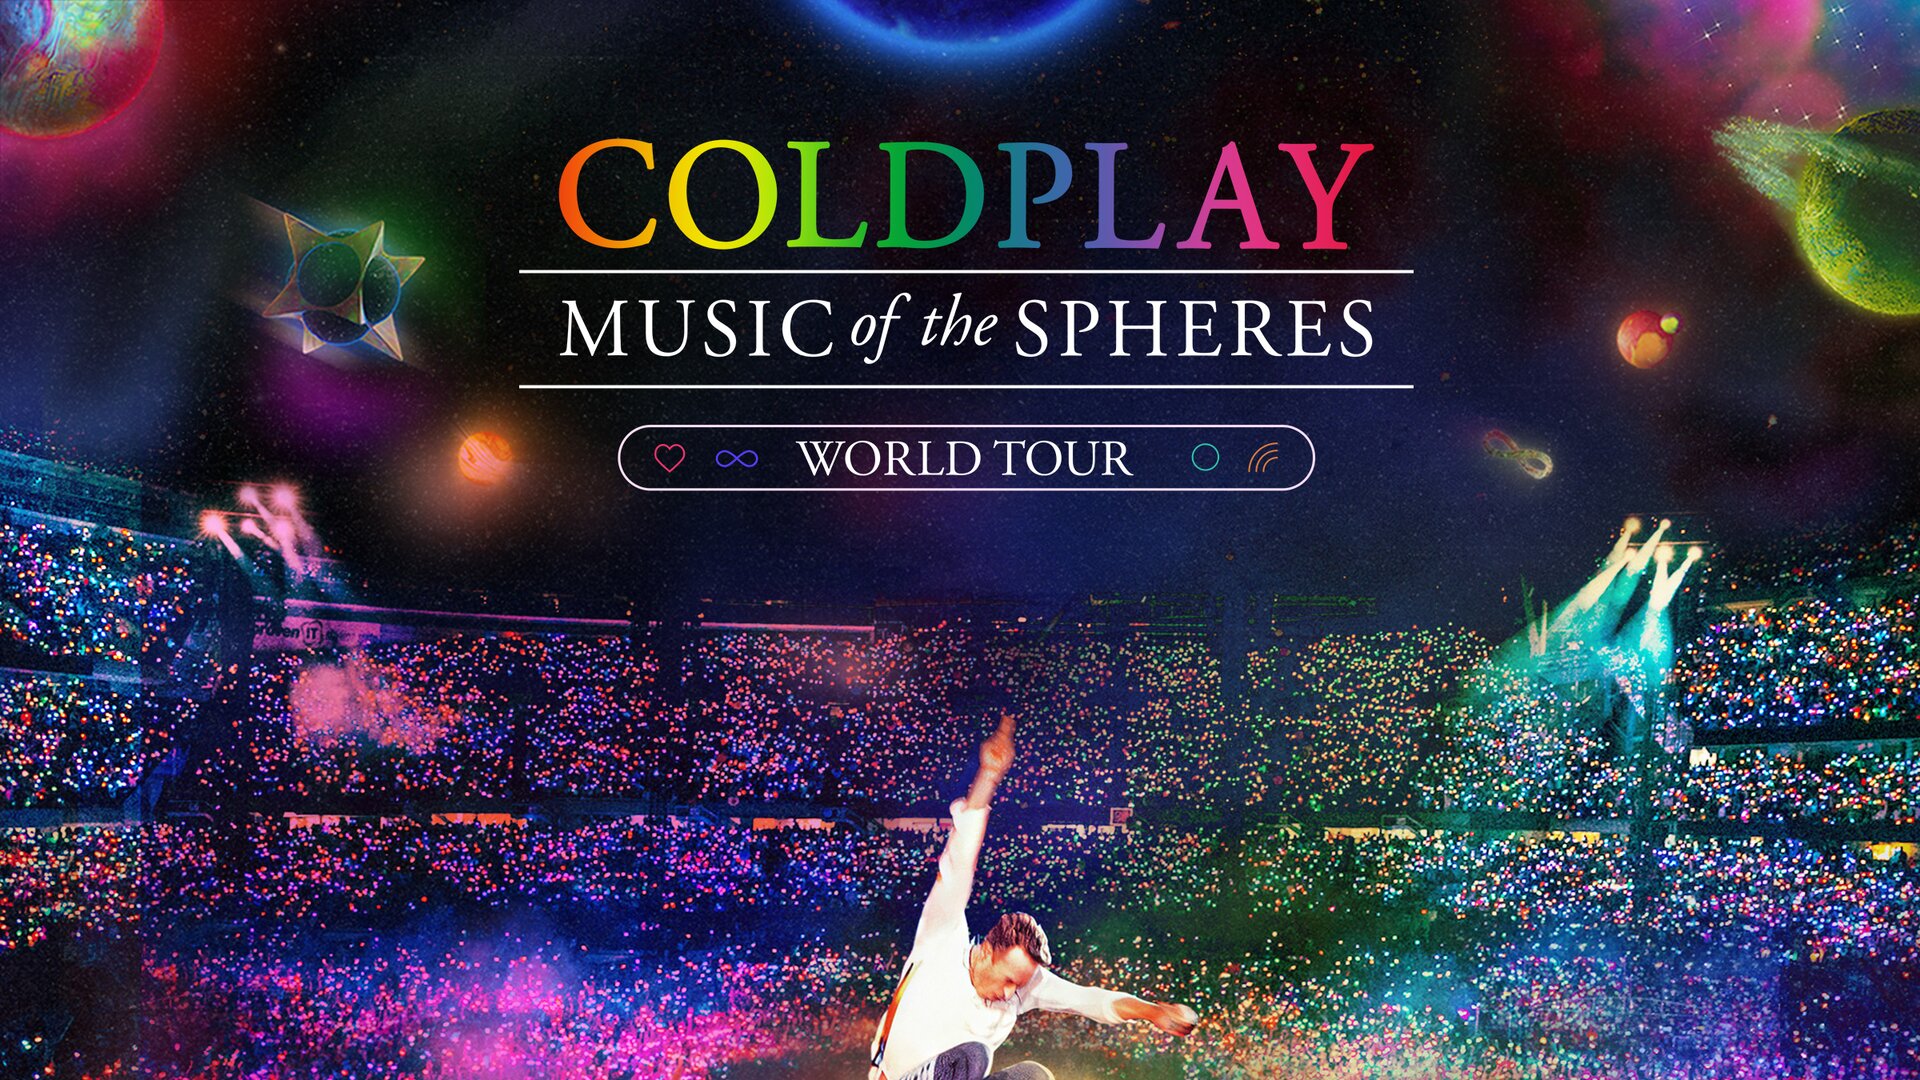 Ole Ole Coldplay! — Til Kingdom Come & Ring Of Fire - Coldplay tribute...